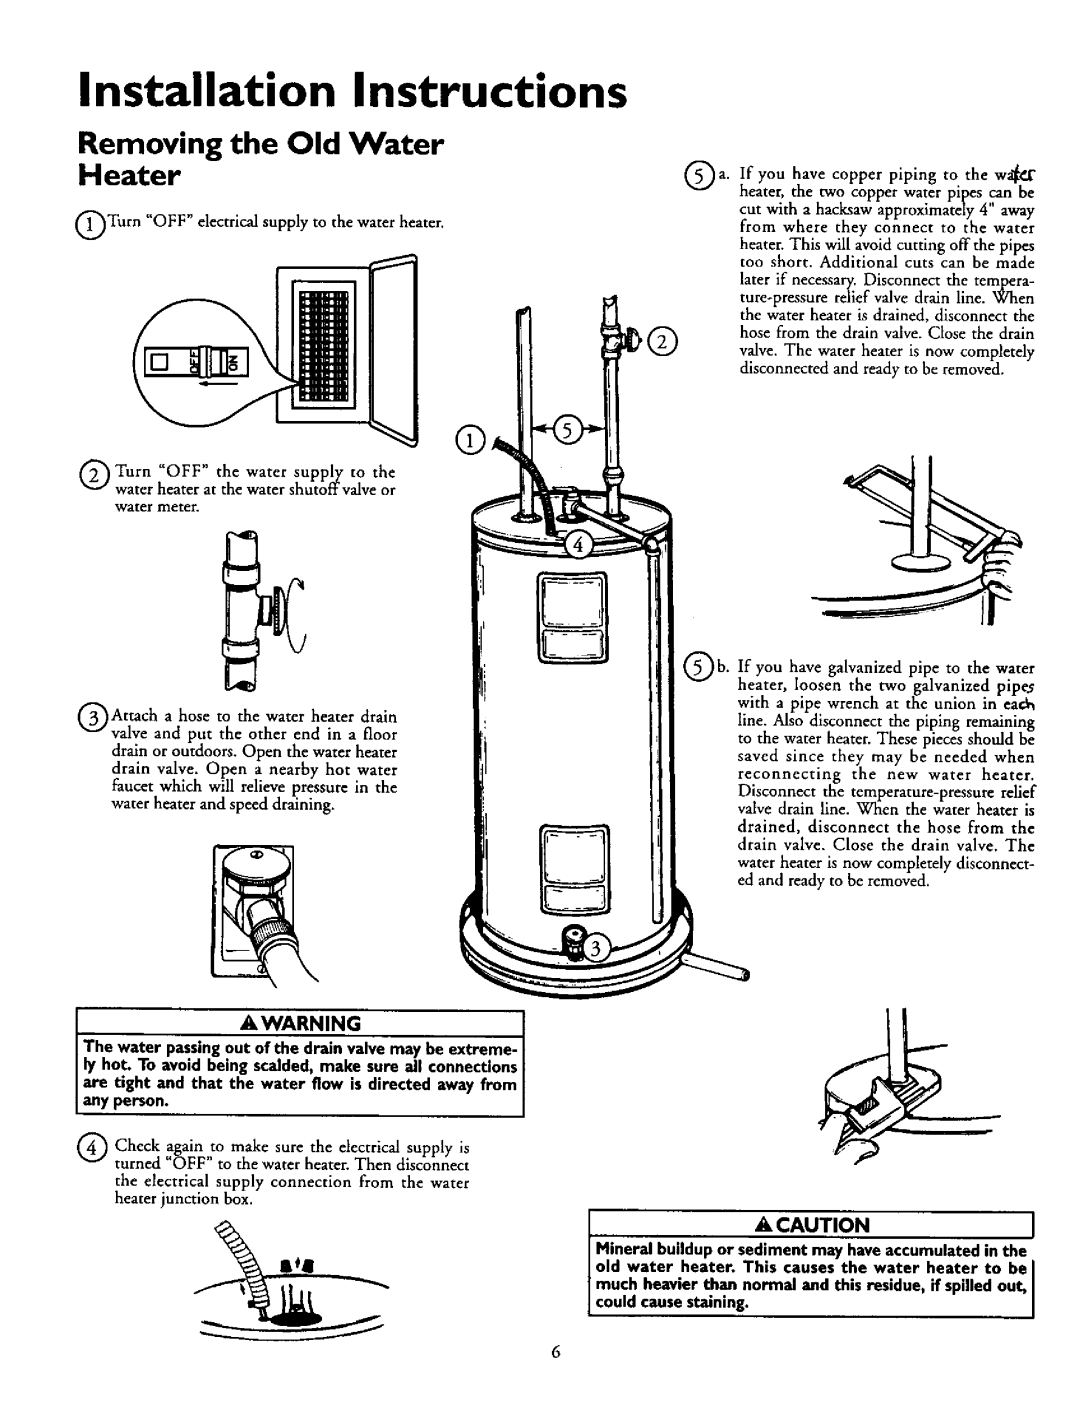 Kenmore 153.320693 HT, 153.320492 HT, 153.320893 HT Installation Instructions, Removing the Old Water Heater, Awarning 